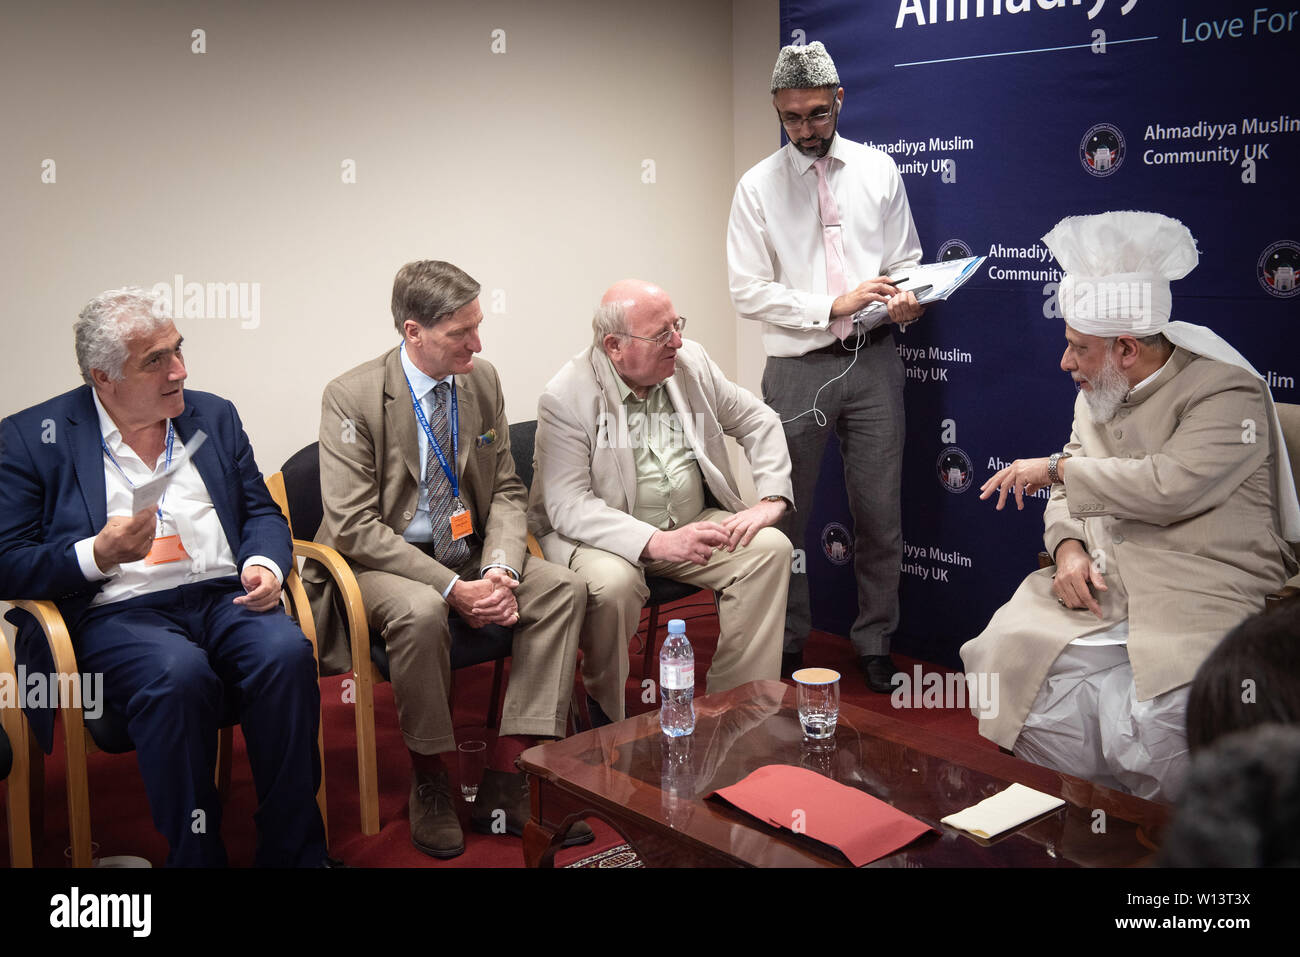 Mubarak Mosque, Sheephatch Lane, Tilford, Surrey, UK. 29th June 2019. Pictured seated L-R: Cllr Stephen Alambritis - Leader of Merton Council;  Rt Hon Dominic Grieve QC MP; Mike Gapes MP; His Holiness Hazrat Mirza Masroor Ahmad. / Hundreds of muslims together with Members of Parliament, Secretaries of State and leaders of various faiths attend the inauguration of the Mubarak Mosque in the Surrey countryside, the new home for the international headquarters of the Ahmadiyya Muslim Community. Credit: Lee Thomas/Alamy Live News Stock Photo